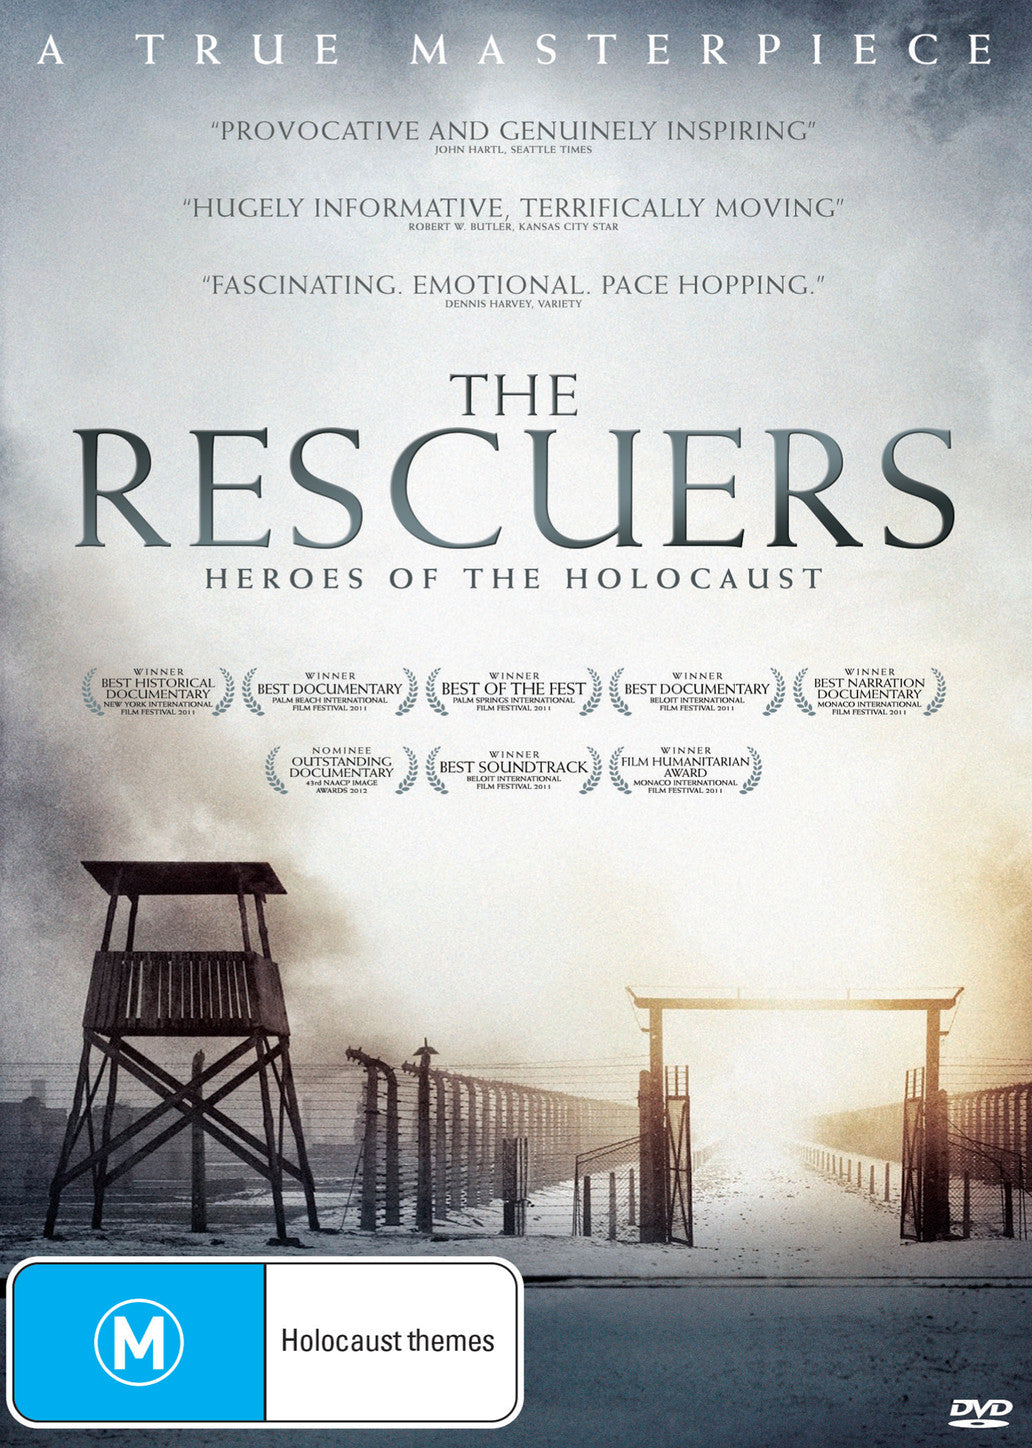 The Rescuers: Heroes of the Holocaust